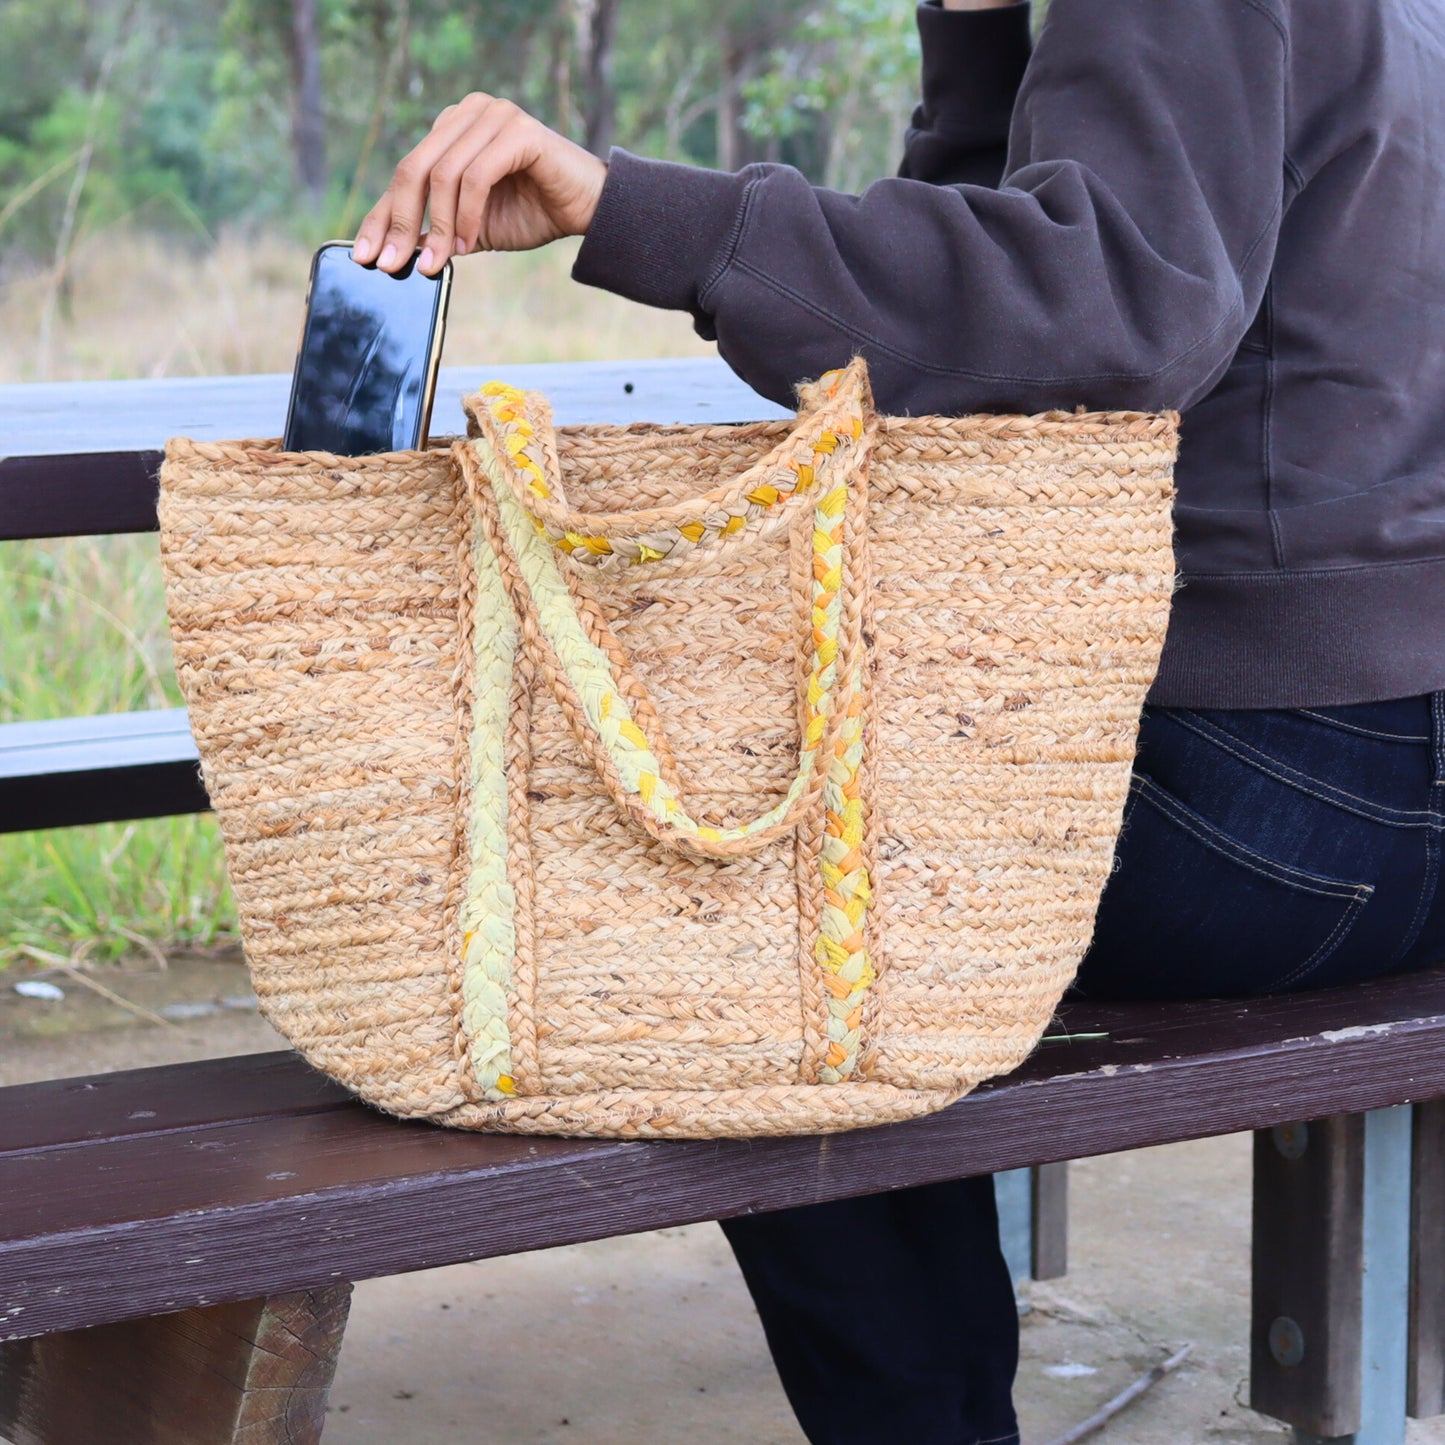 Recycled Cloth & Jute Tote Bag, Hand woven Yellow Braided Striped Bag - Aksa Home Decor 